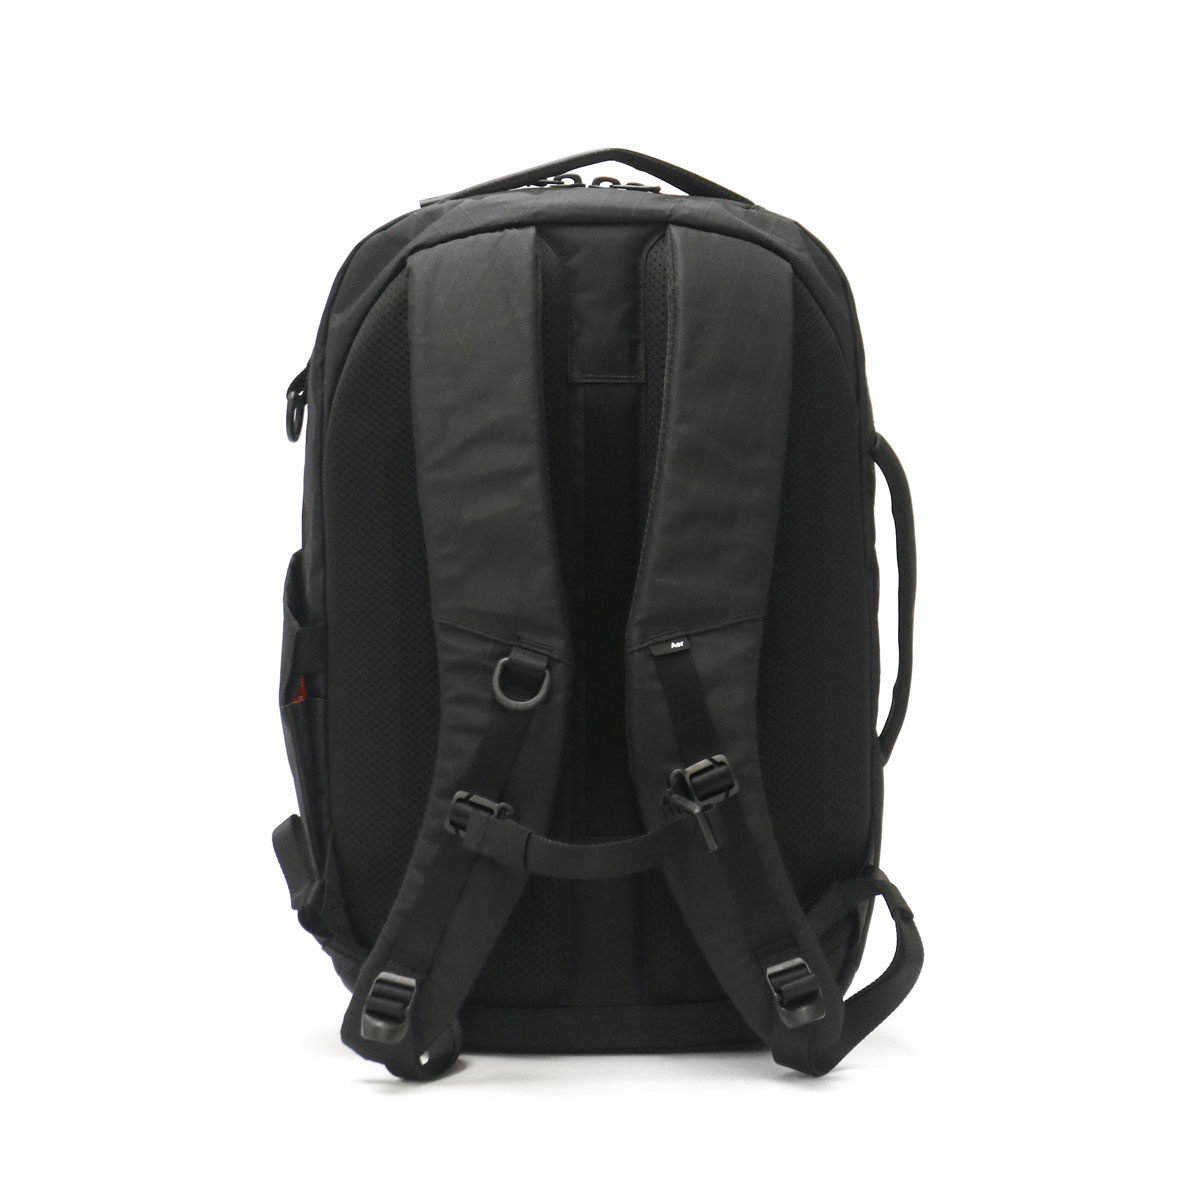 Aer エアー City Collection City Pack X-pac バックパック 14L 